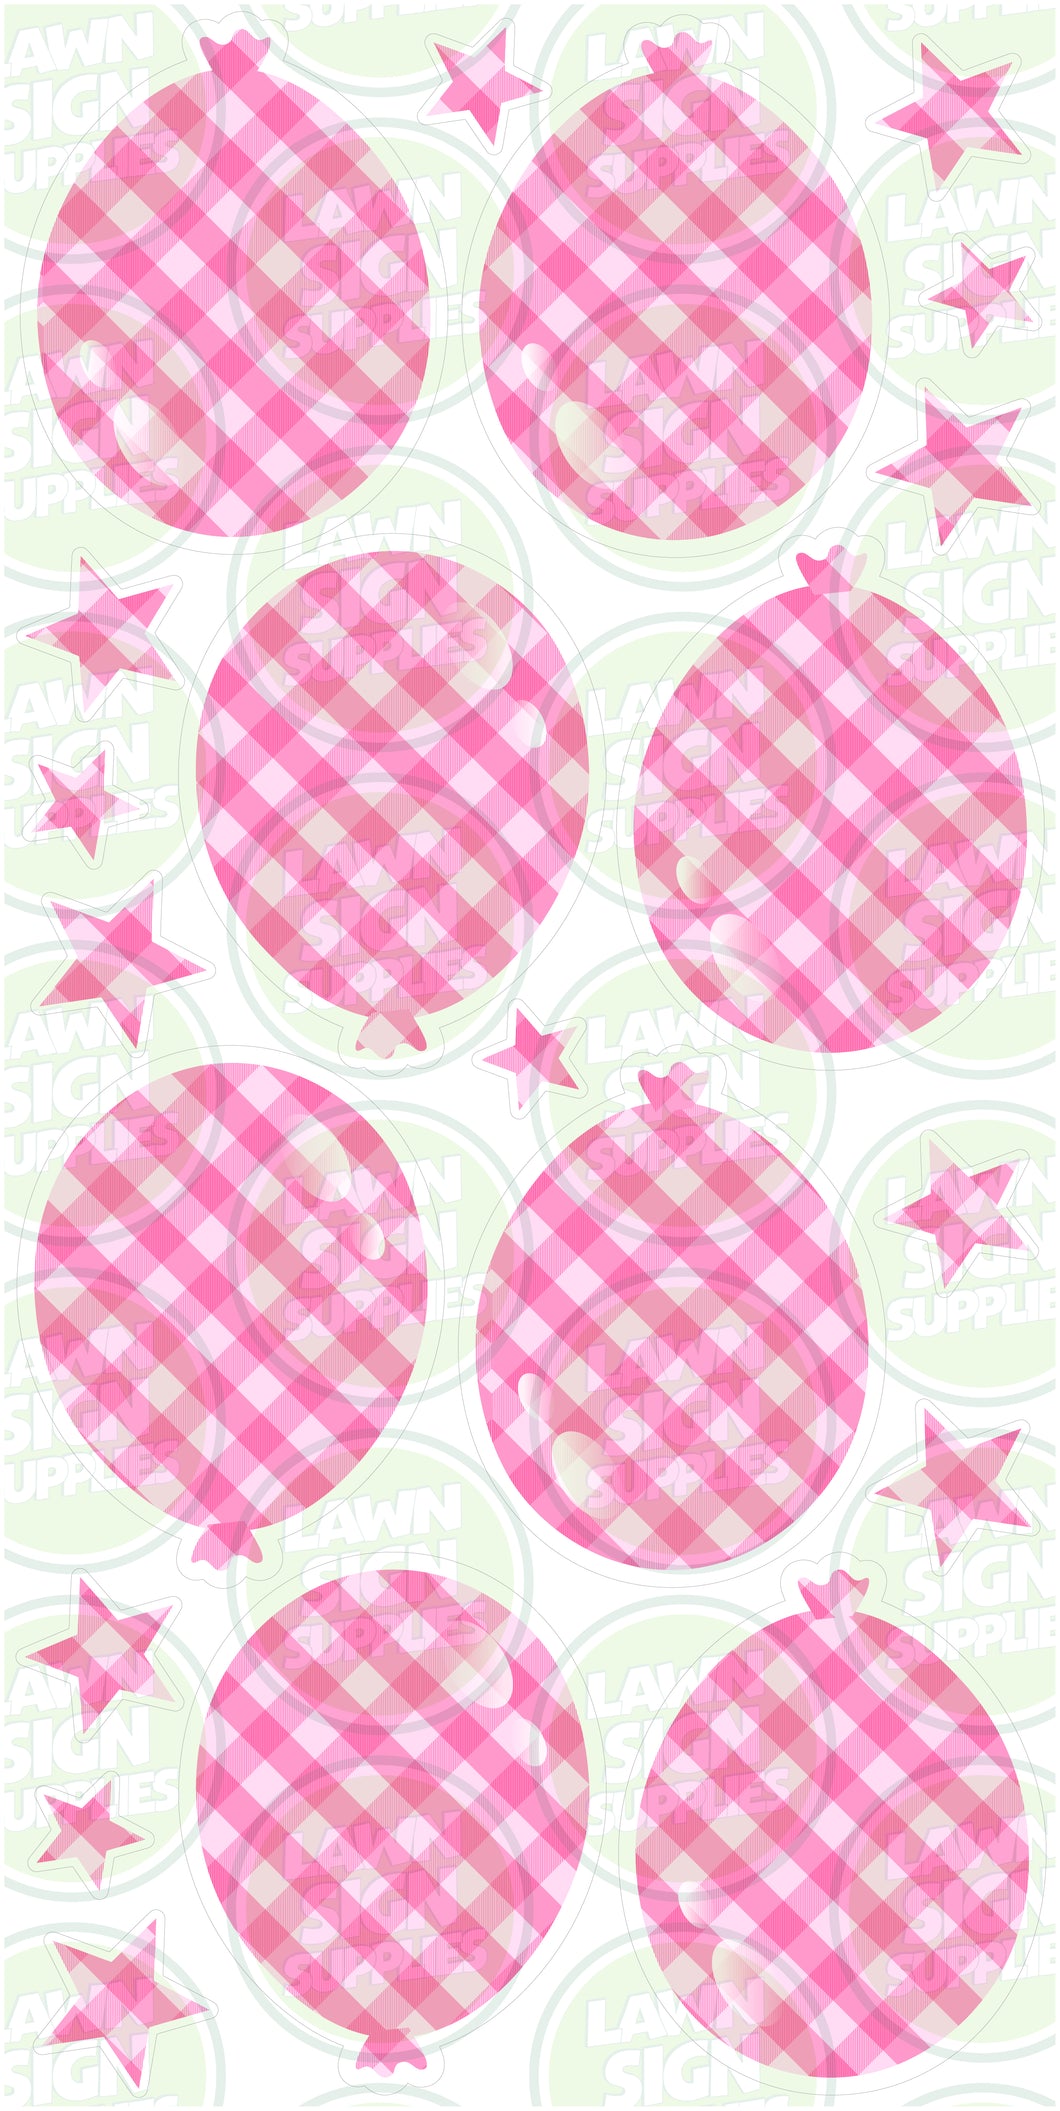 PATTERNED BALLOONS - PINK GINGHAM